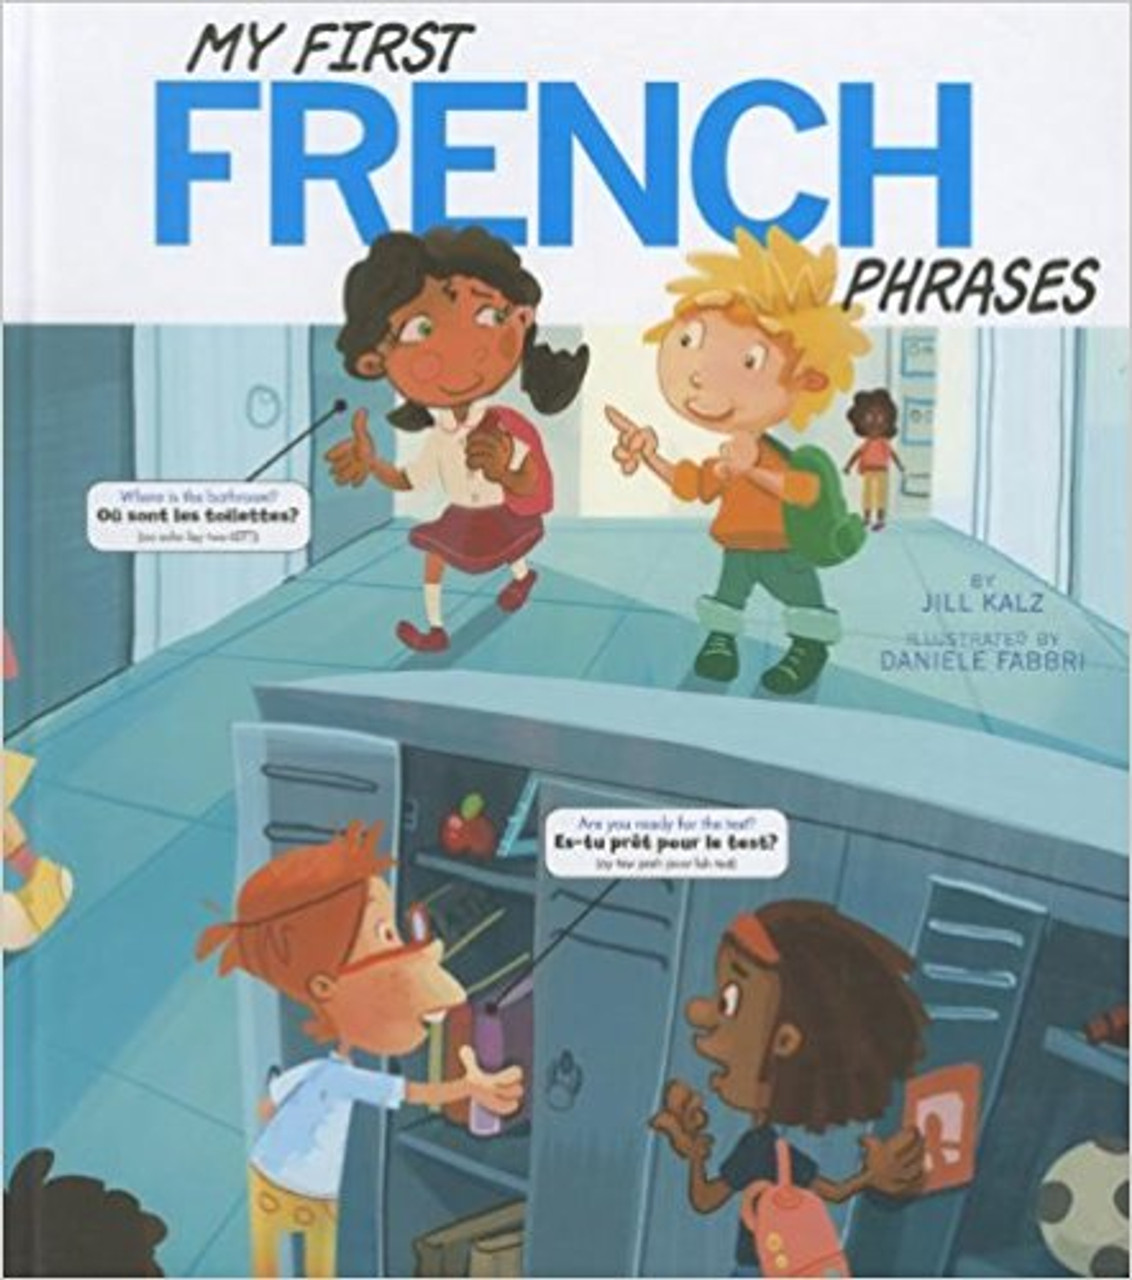 My First French Phrases by Daniele Fabbri